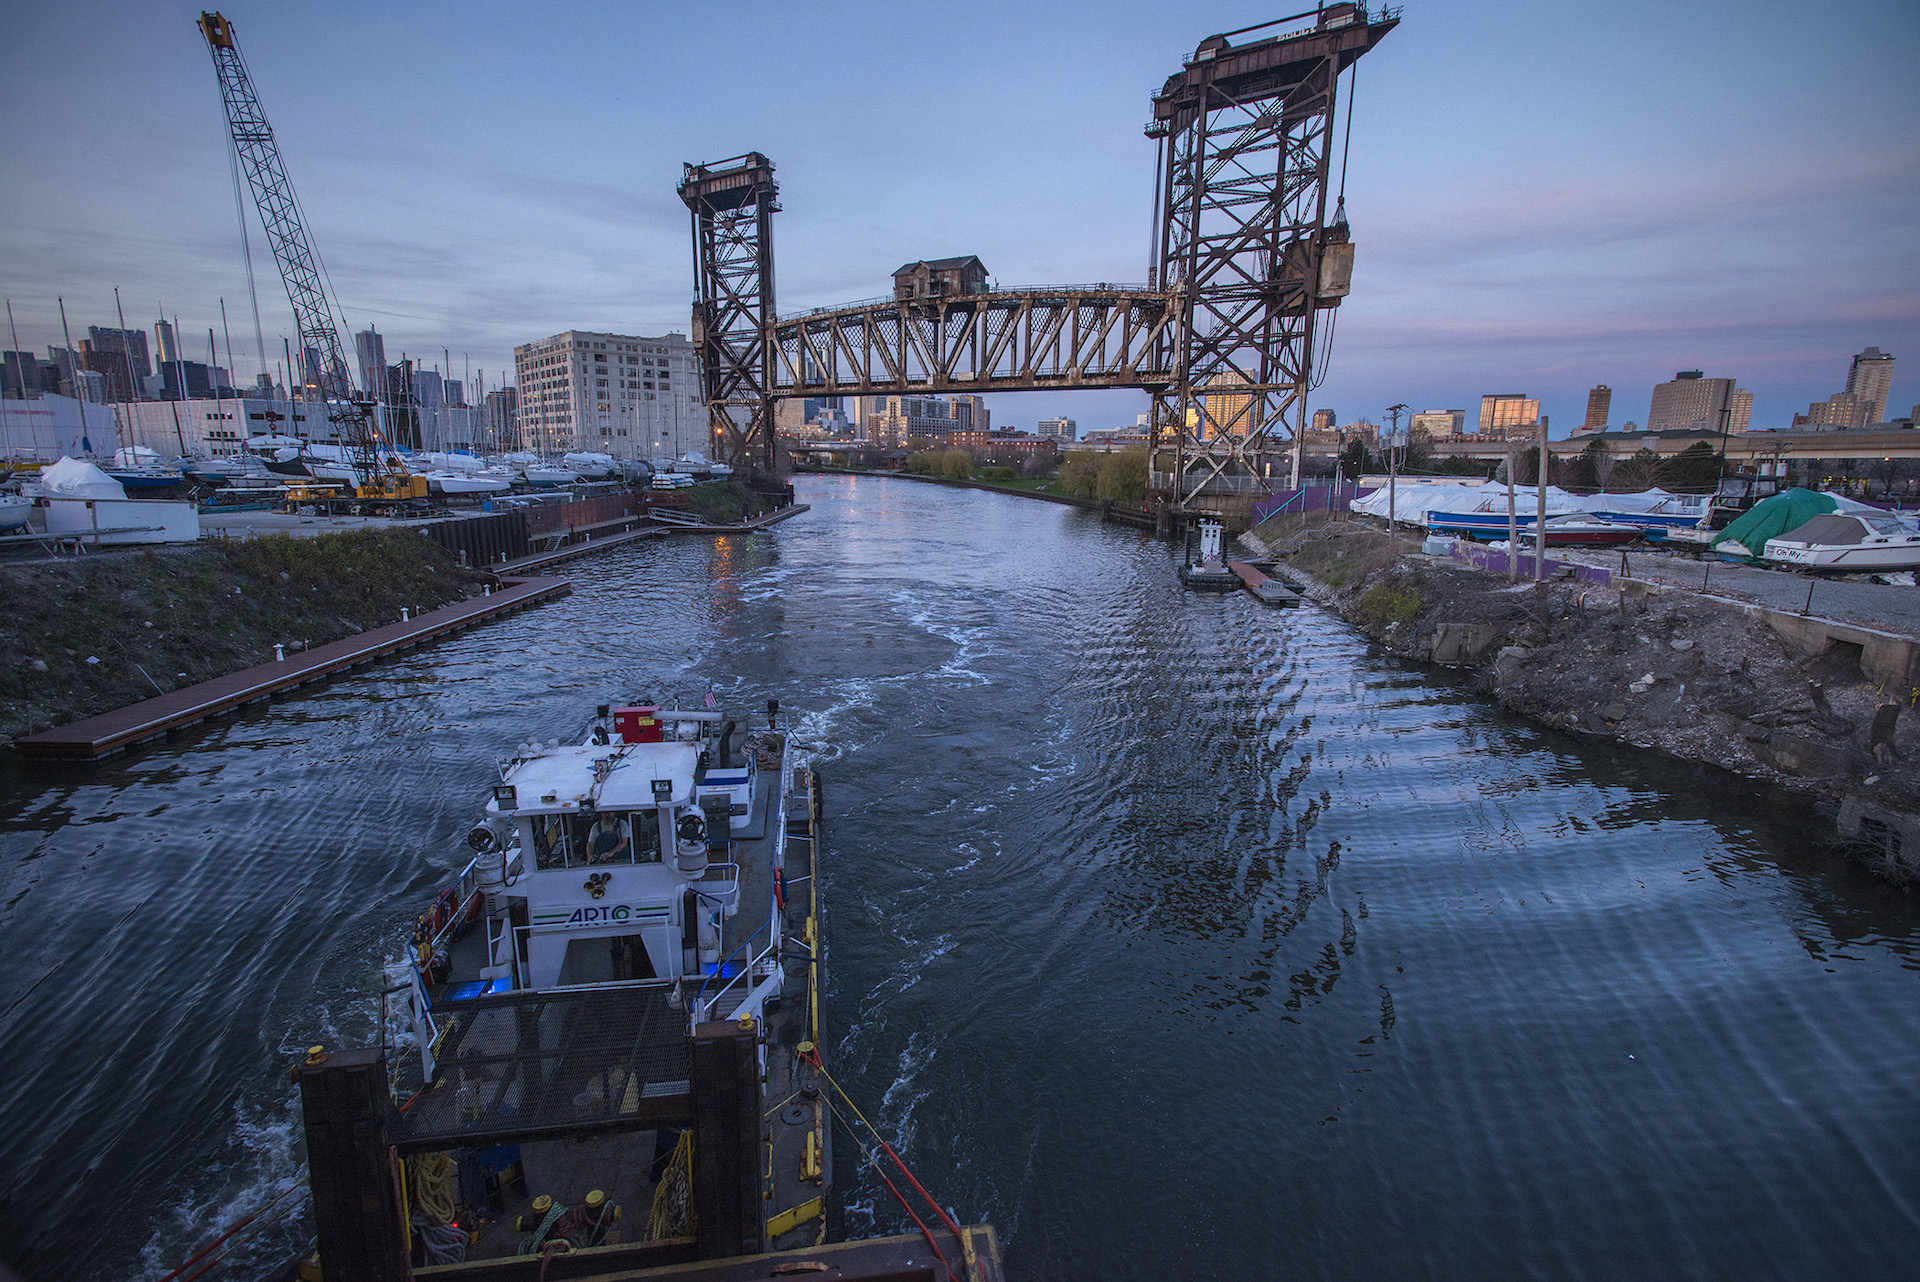 A boat moves along a dark river through an industrial landscape with a steel vertical lift bridge in the background